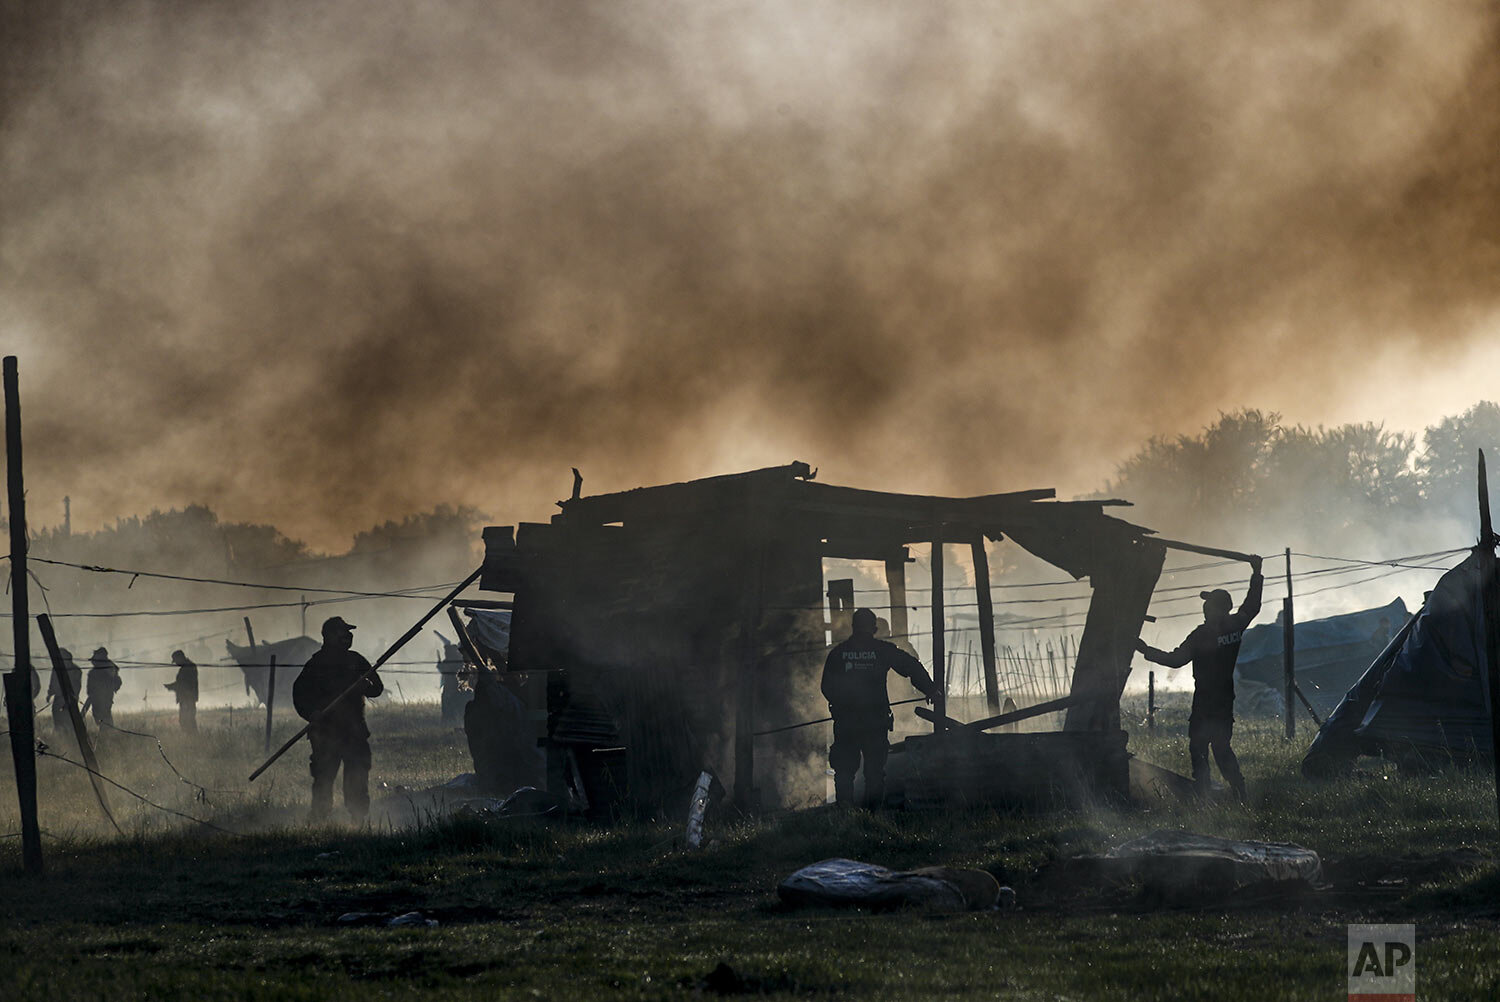  Police destroy shack homes as they carry out the eviction of a squatters camp in Guernica, Buenos Aires province, Argentina, Oct. 29, 2020. (AP Photo/Natacha Pisarenko) 